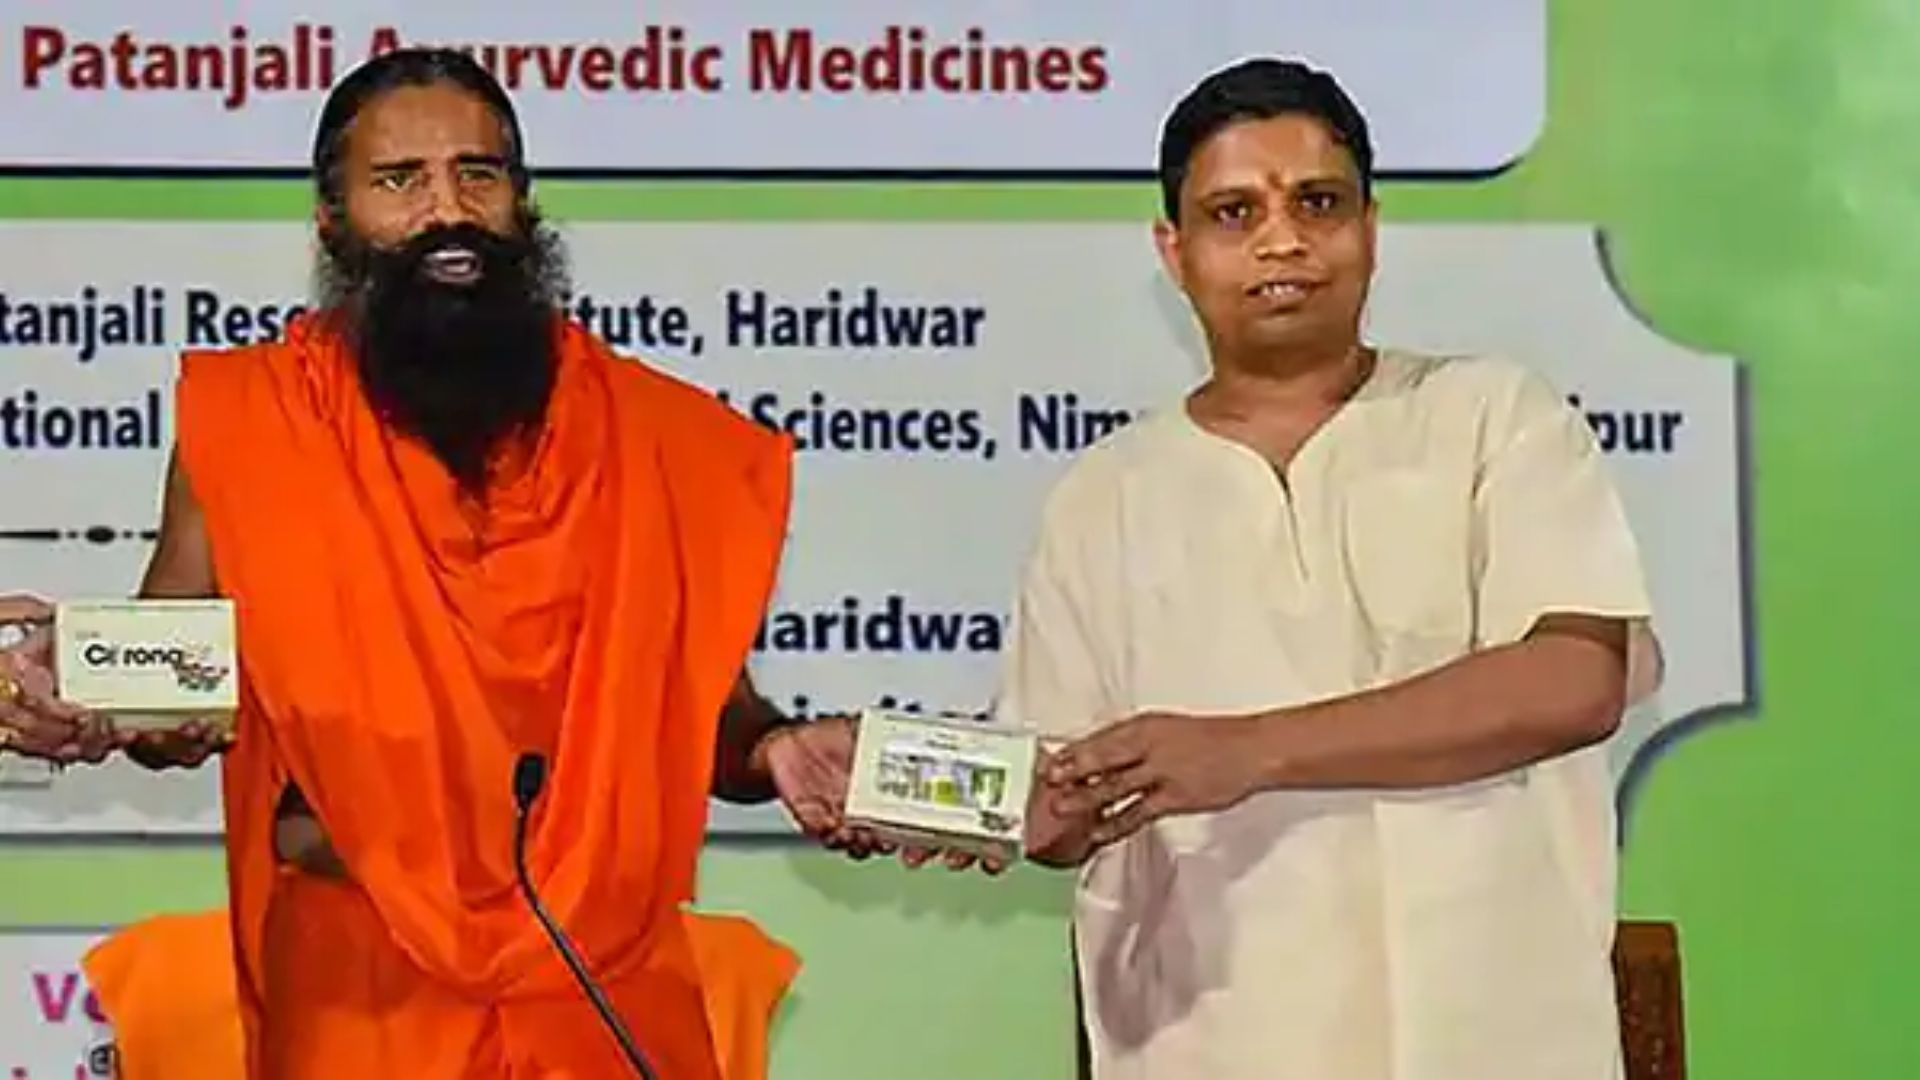 Patanjali Ayurved MD Acharya Balkrishna submits unqualified apology to Supreme Court over alleged misleading ads